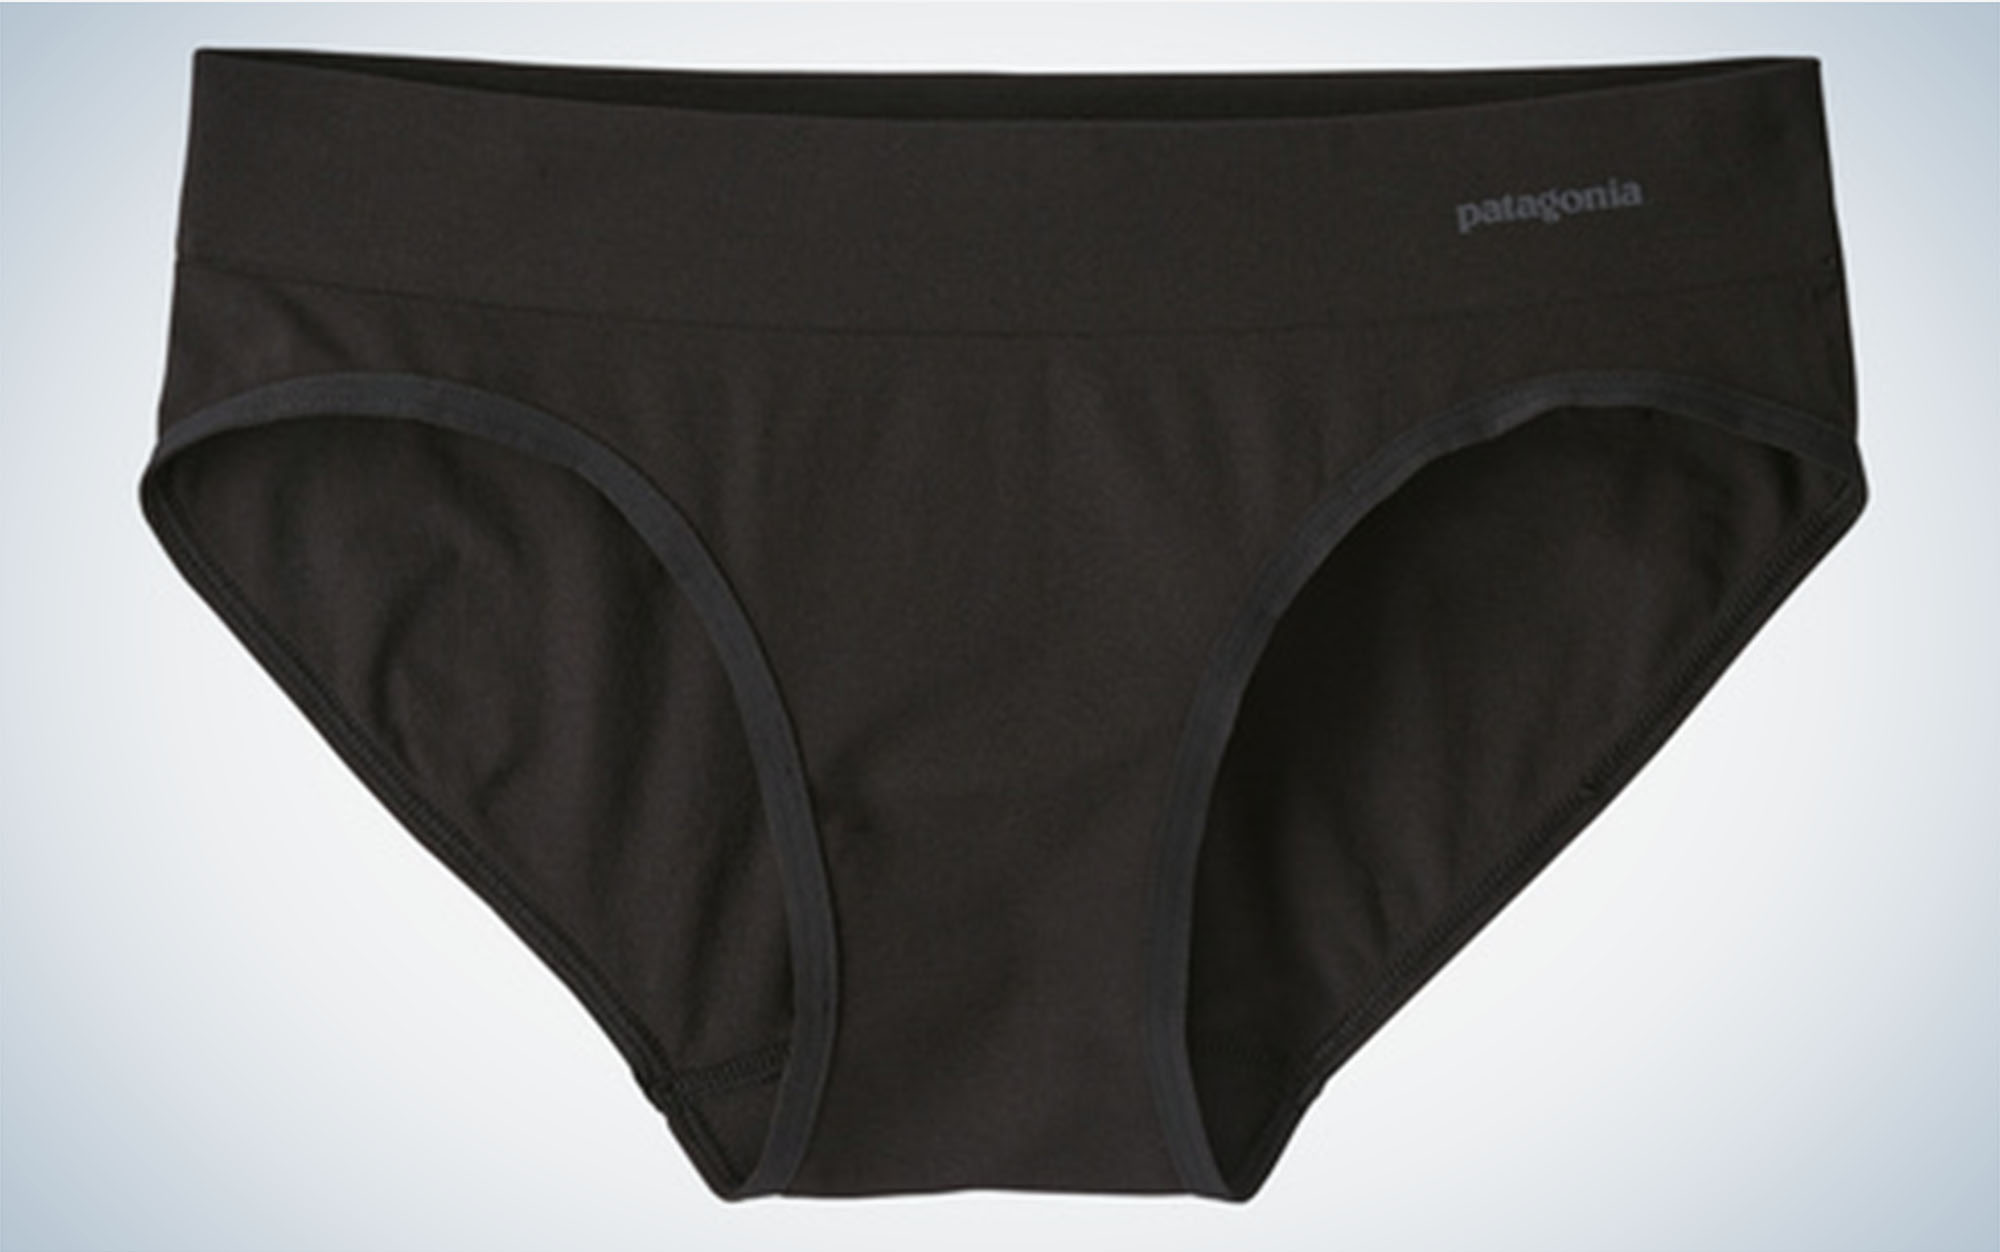 Patagonia Women’s Active Hipster is one of the best hiking underwear.